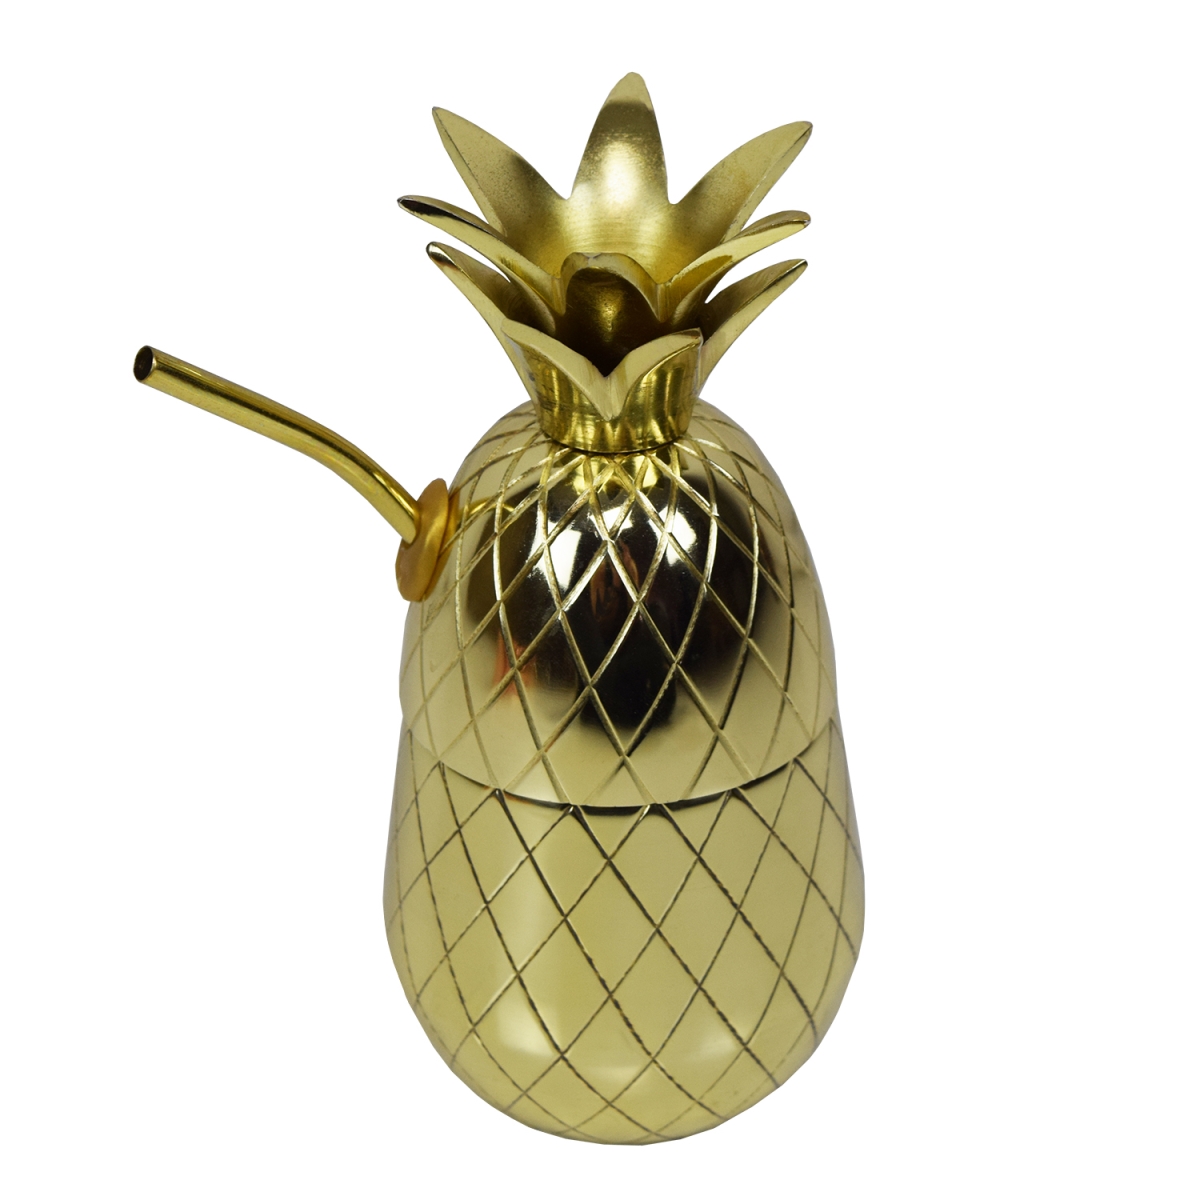 Oakland Living Pineapple-gd 16 Oz Pineapple Tumbler Shaker Mug With Straw Handcrafted With Rubber Tight Seal, Brass Gold